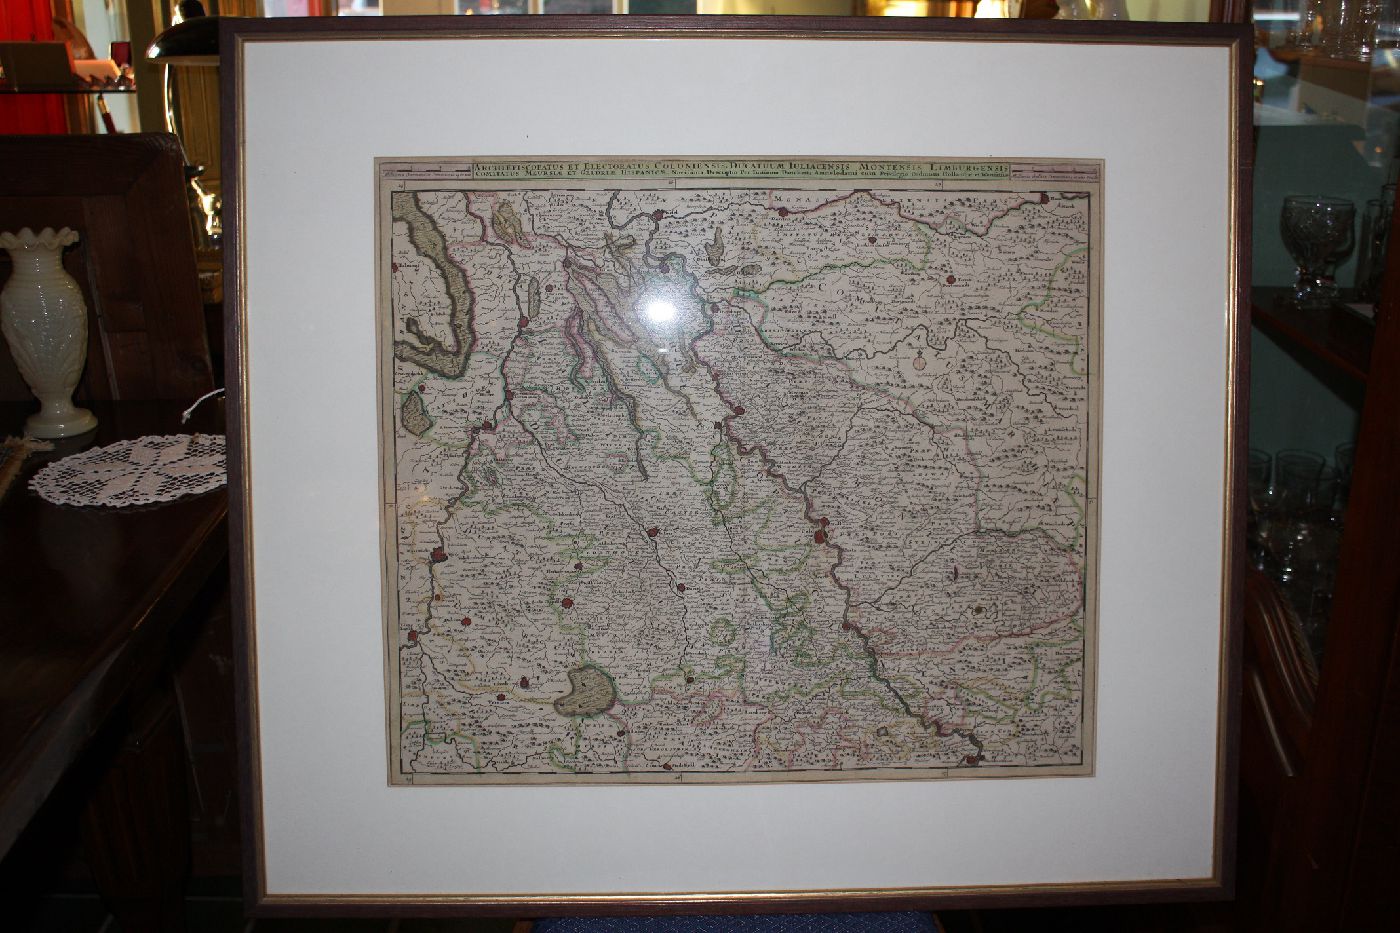 A 1700 coloured copper engraving map of Central Germany by Justus Danckerts